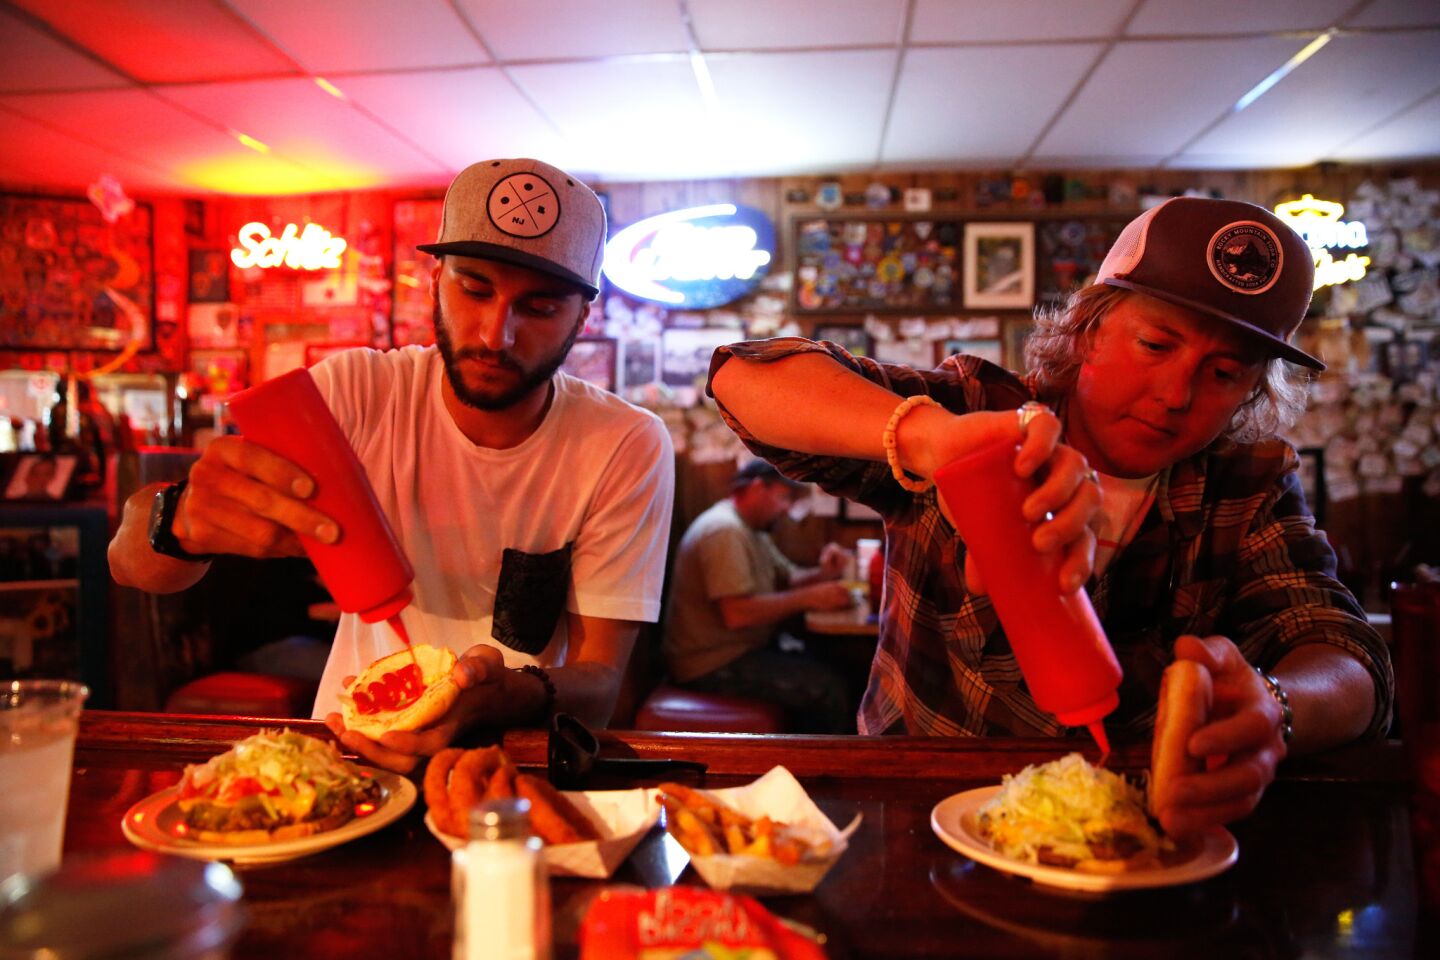 Friends Matt Fullam from Durango, CO and Anthony Appezzato from Denver, CO prepare to dig into their Green chile cheeseburgers at the Owl Bar and Cafe in San Antonio, NM